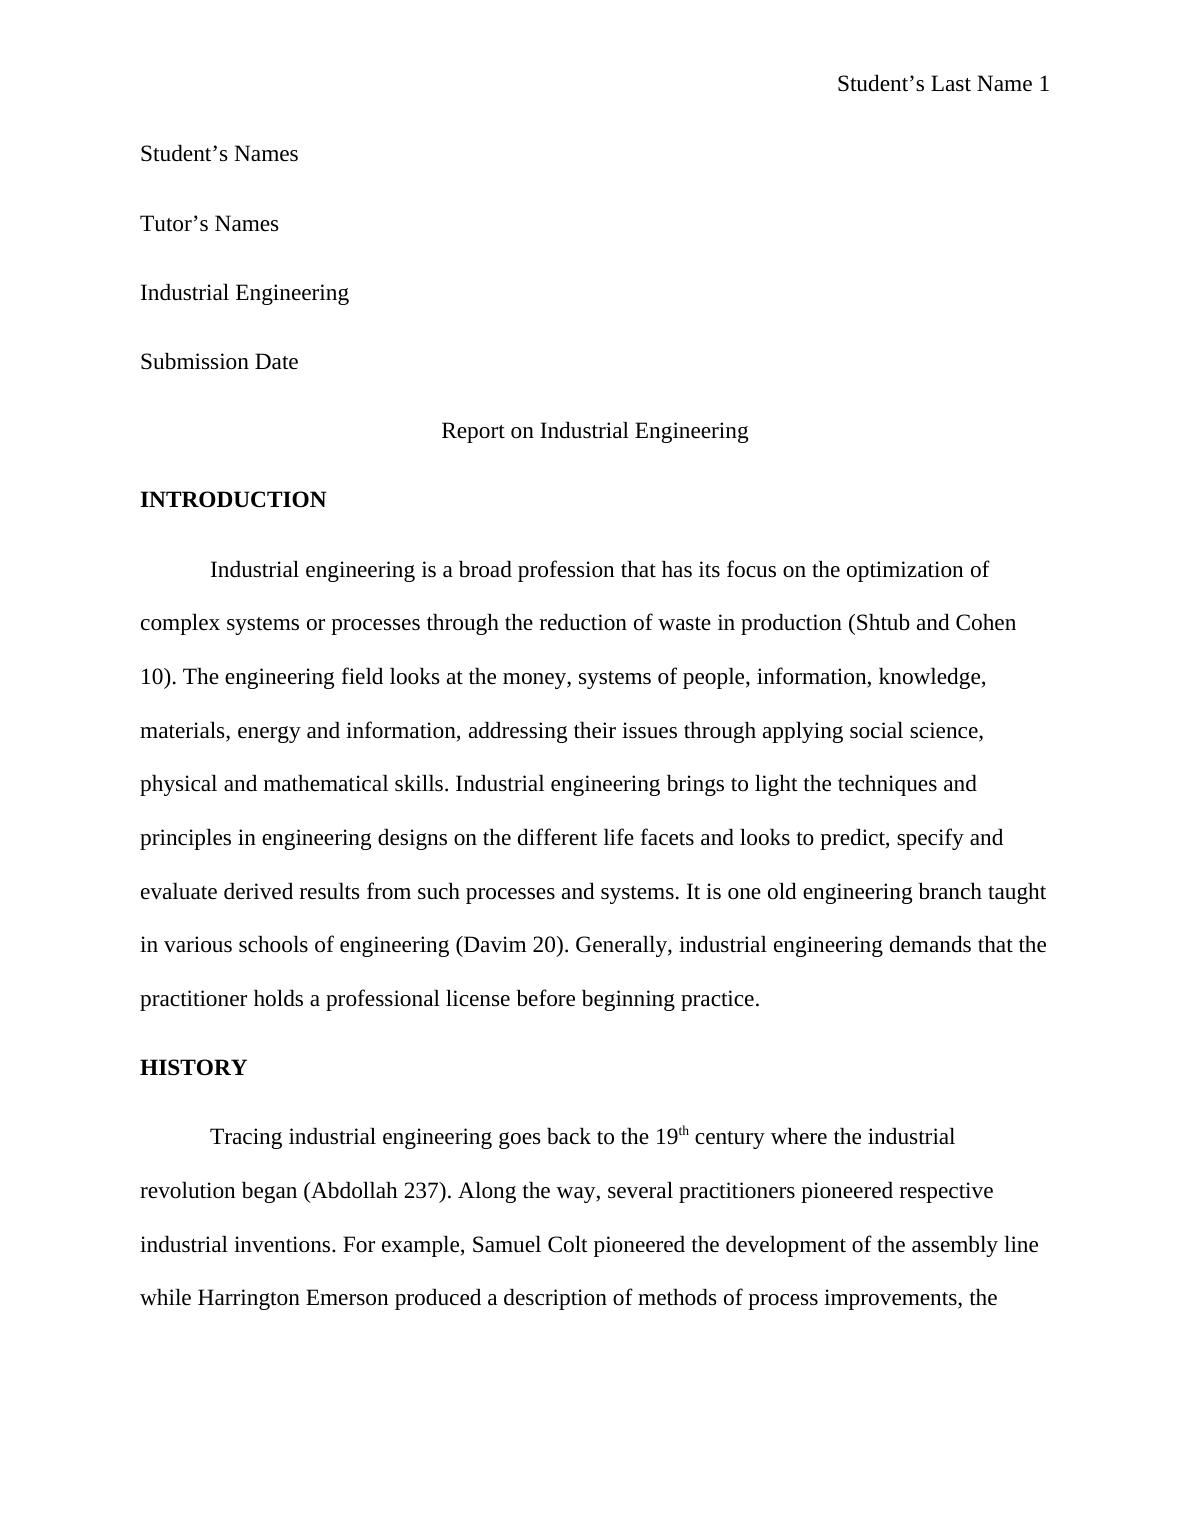 Industrial Engineering Submission_1